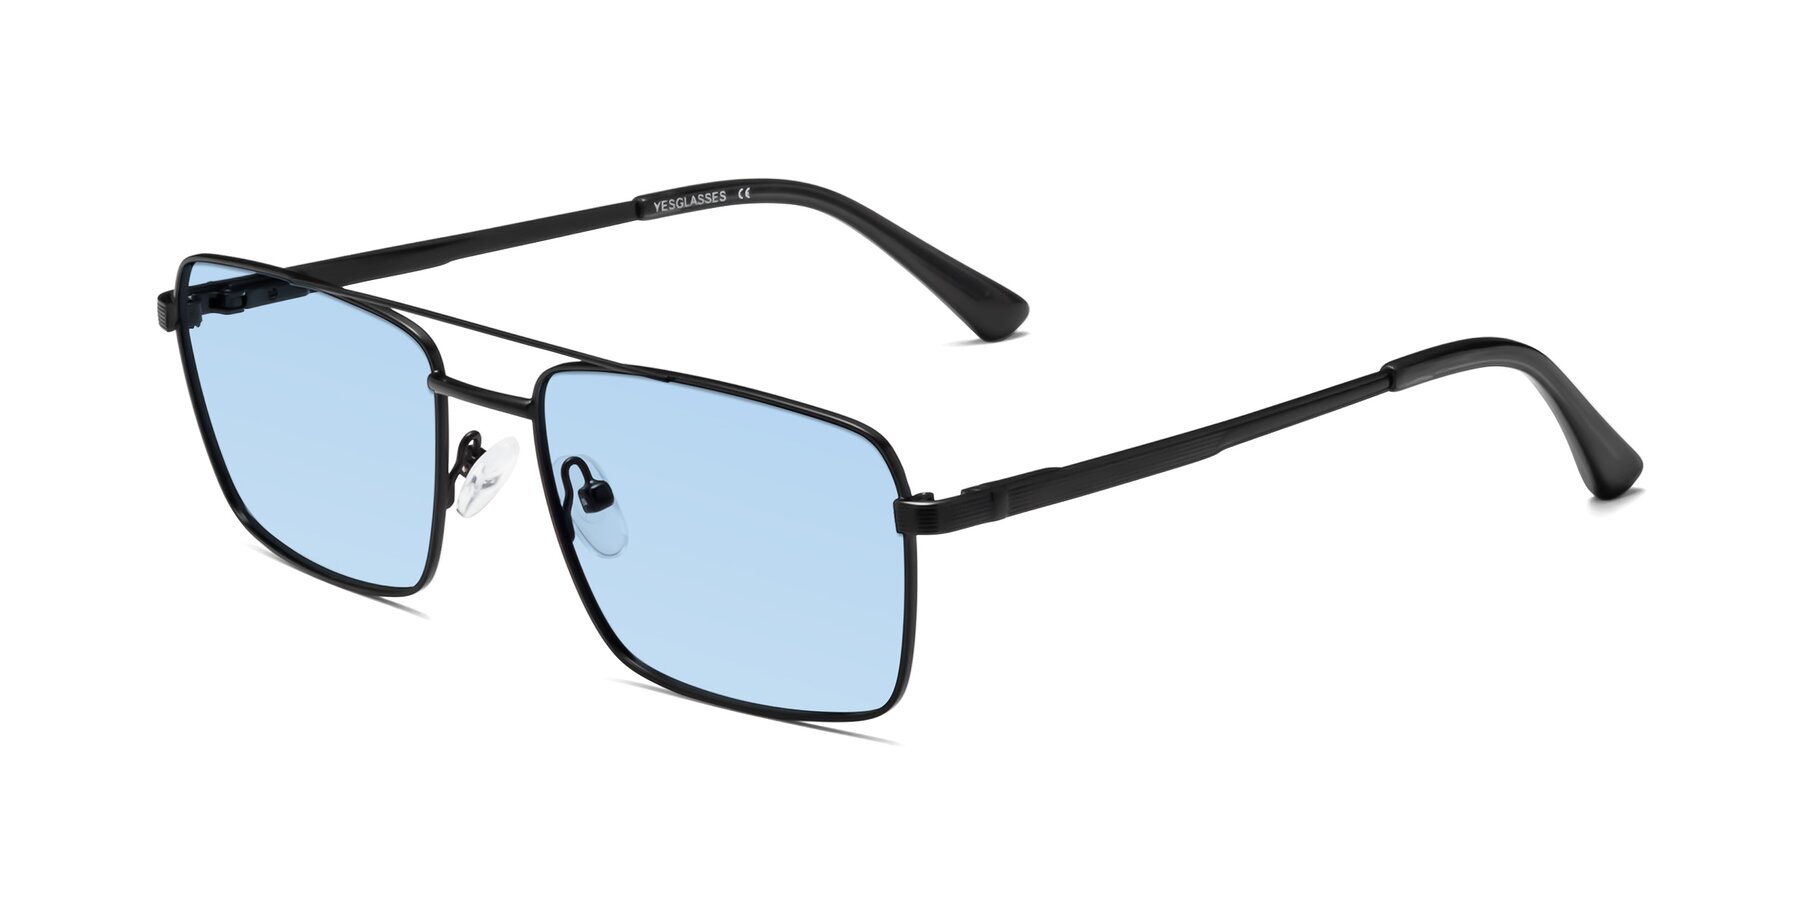 Angle of Beckum in Black with Light Blue Tinted Lenses